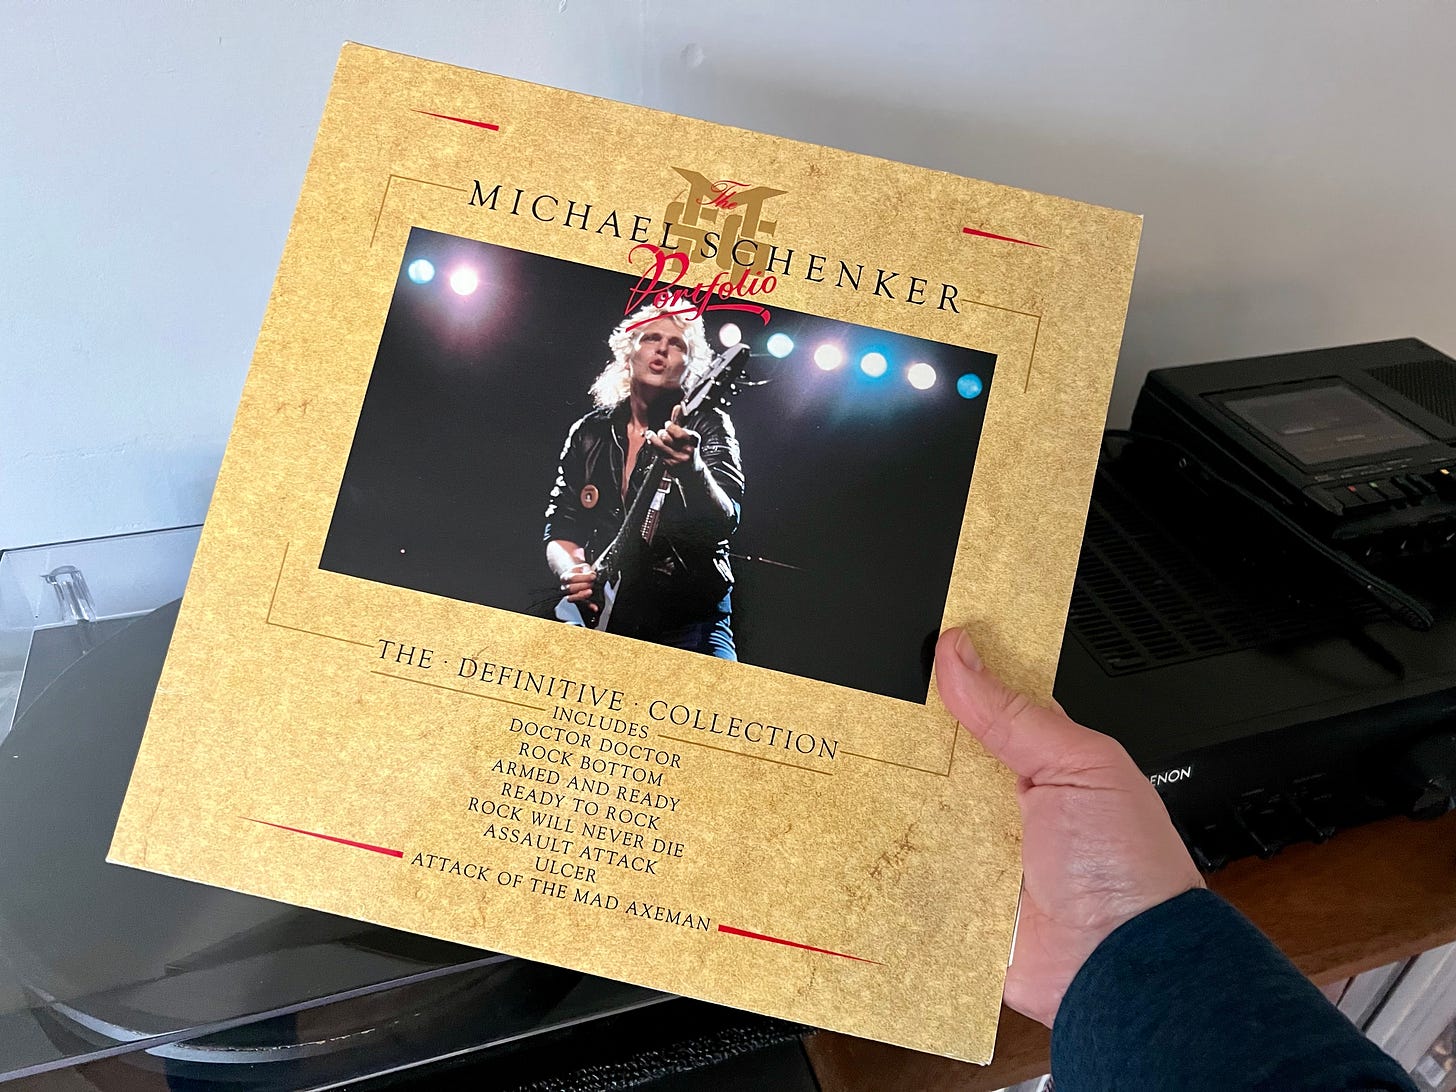 an album by Michael Schenker called the Michael Schenker portfolio is being held above a Project Carbon Record player